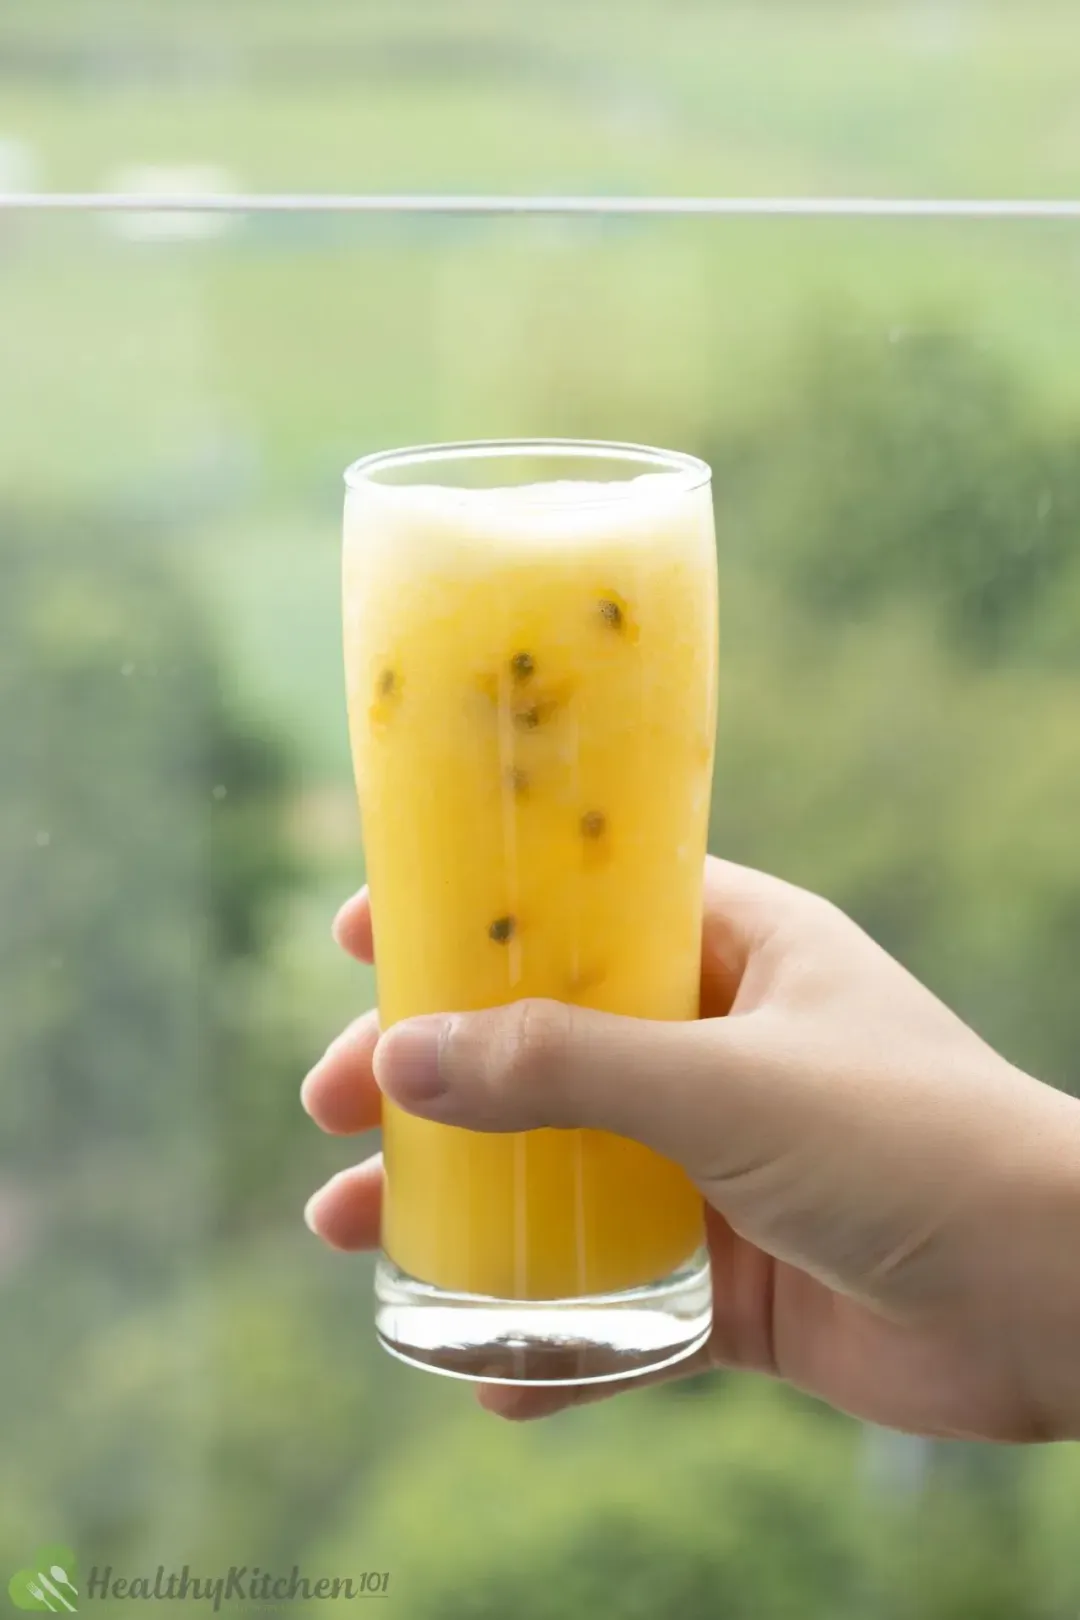 A hand holding a glass of passion fruit blended with mango by a window